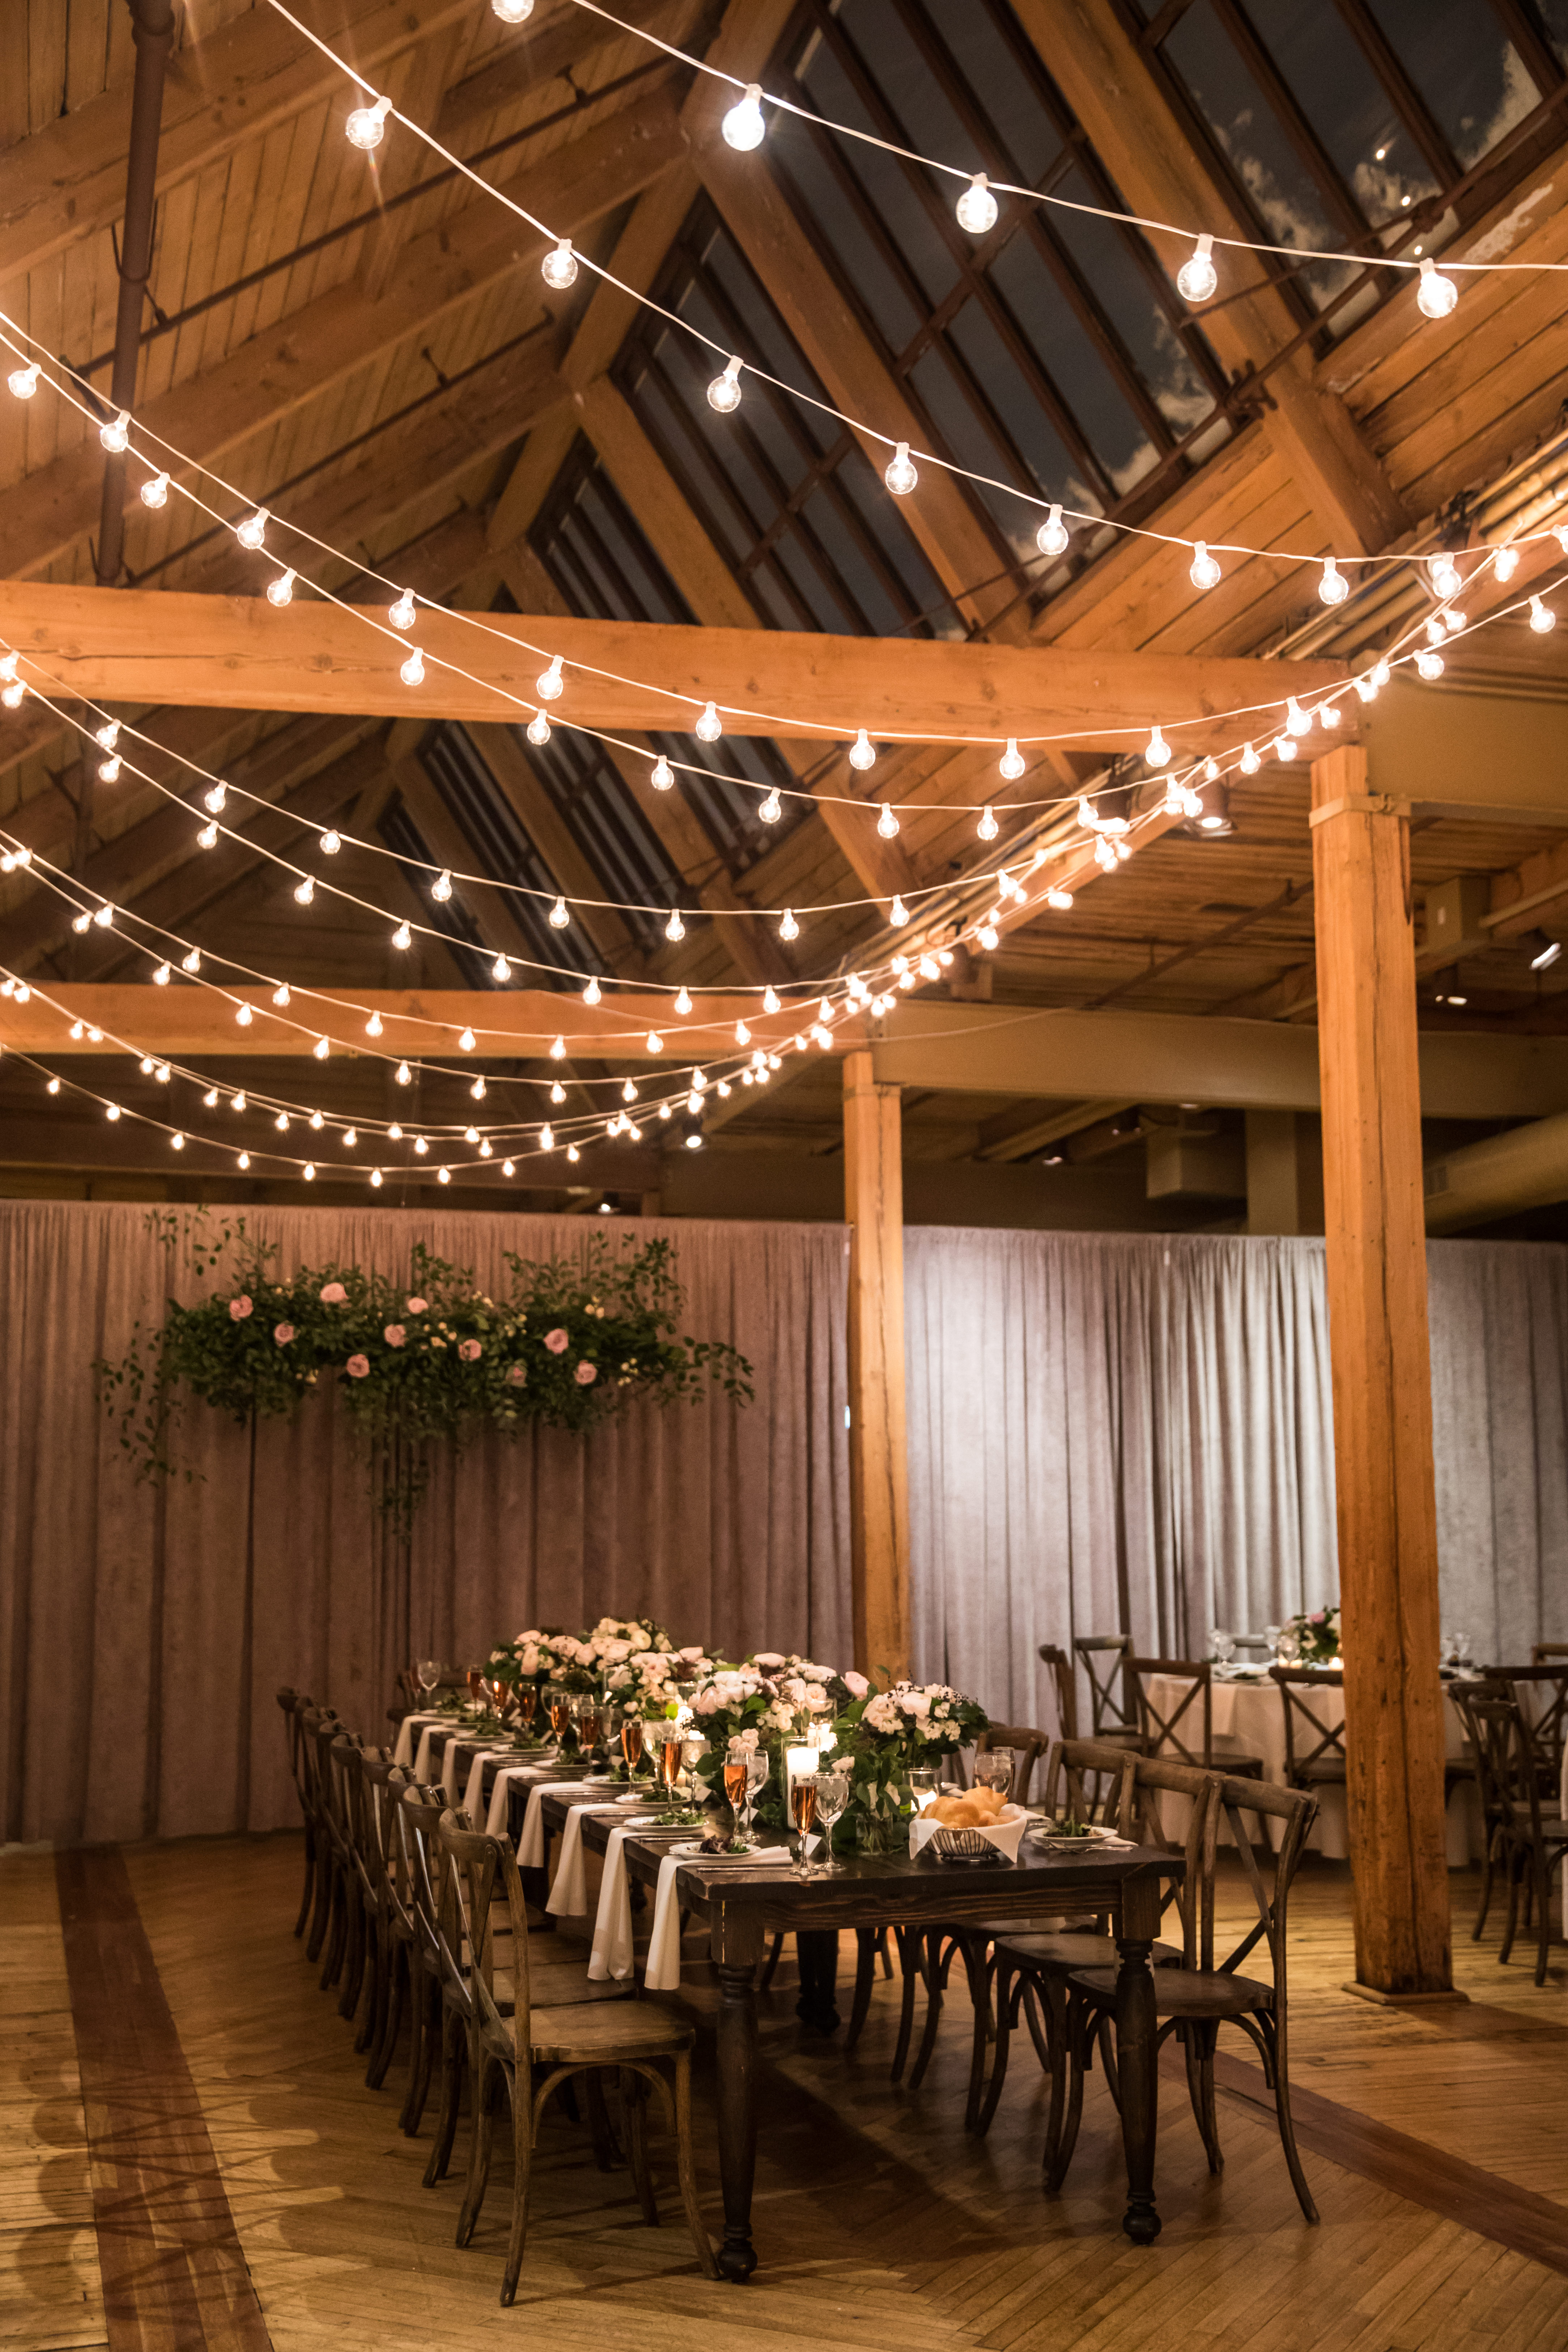 Bridgeport Art Center Skyline Loft winter wedding with kings table, hanging installation with garden roses, and string lights.